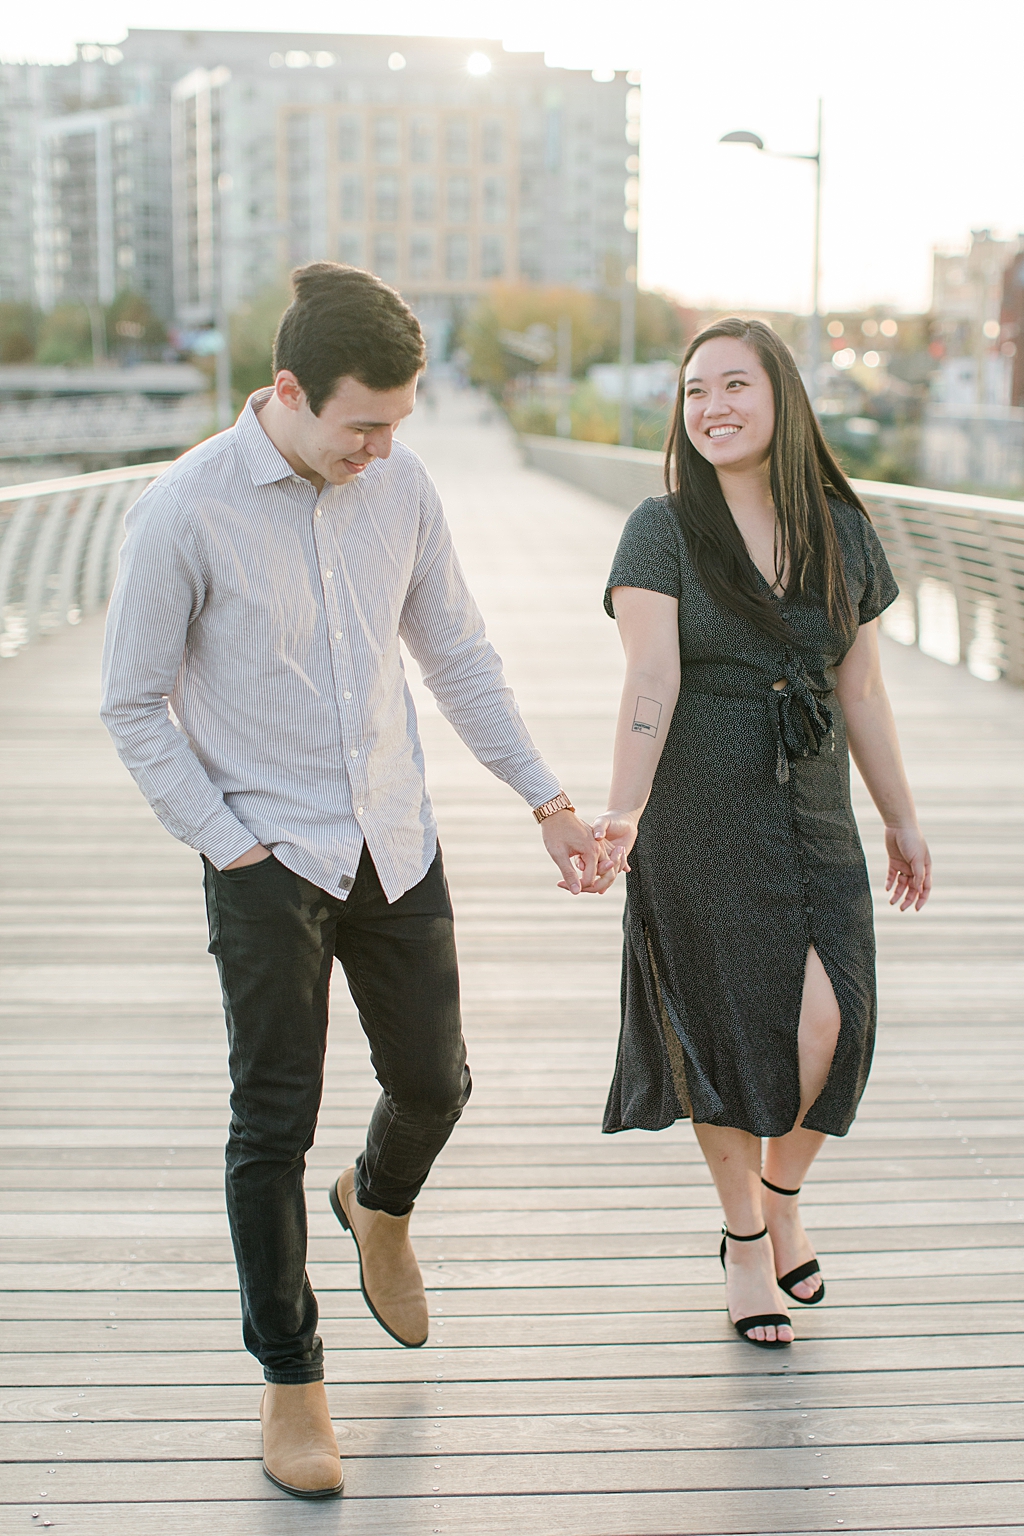 Becky_Collin_Navy_Yards_Park_The_Wharf_Washington_DC_Fall_Engagement_Session_AngelikaJohnsPhotography-7791.jpg